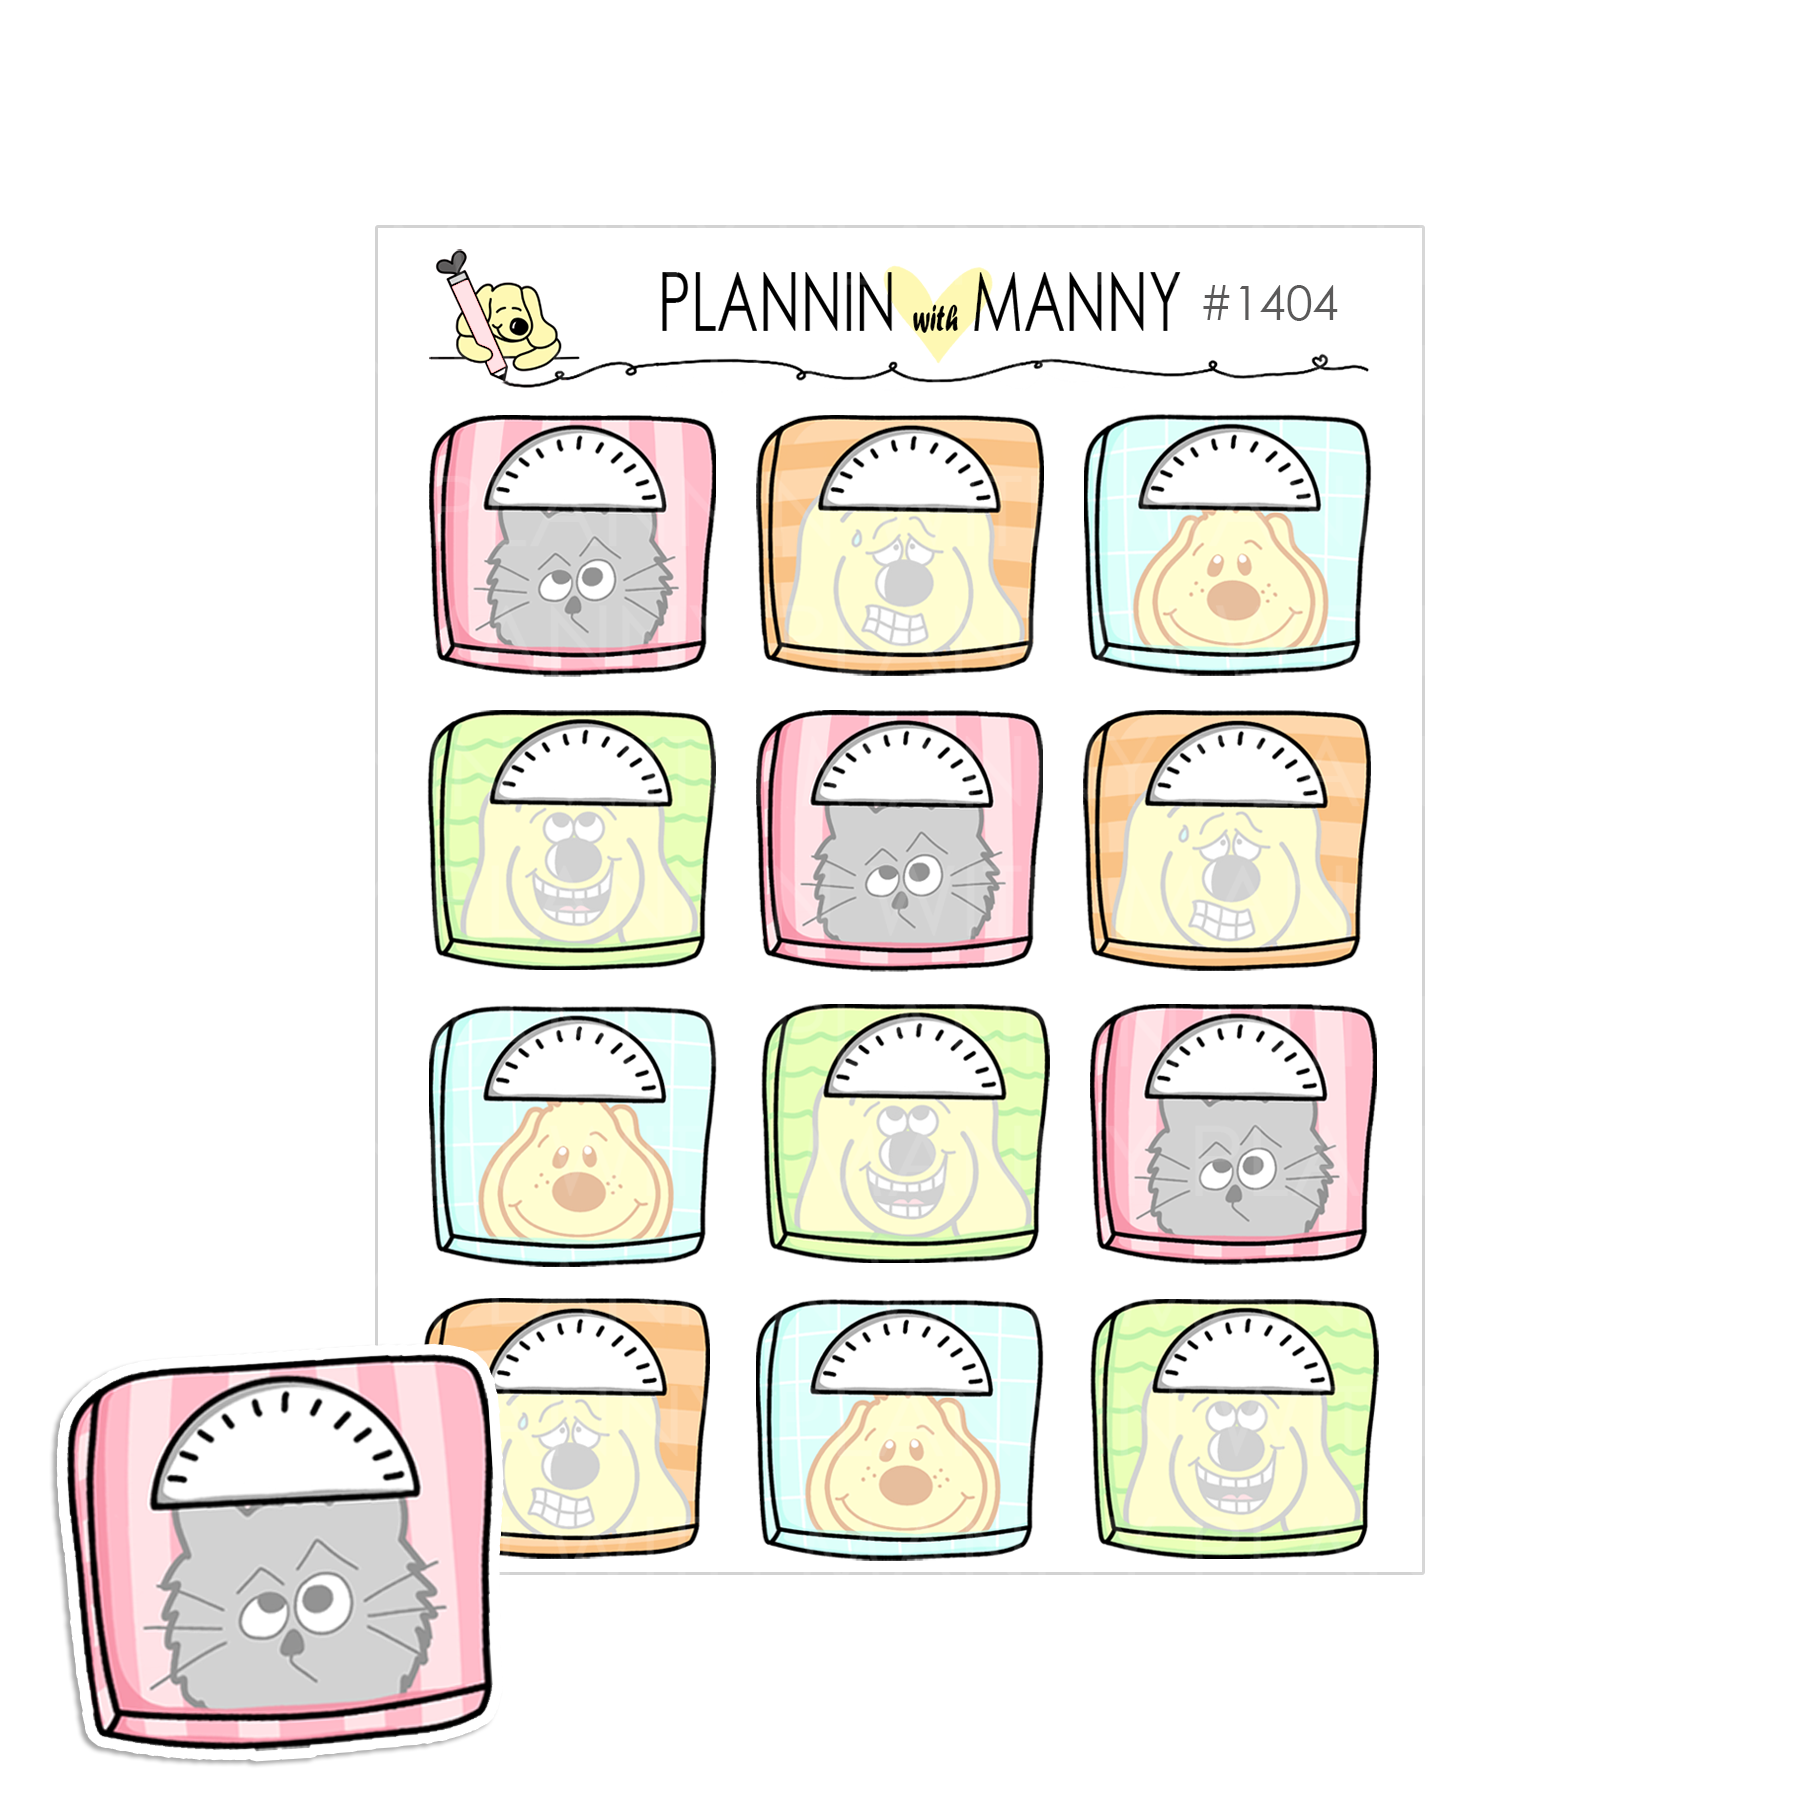 1404 Scale Write In Weight Planner Stickers